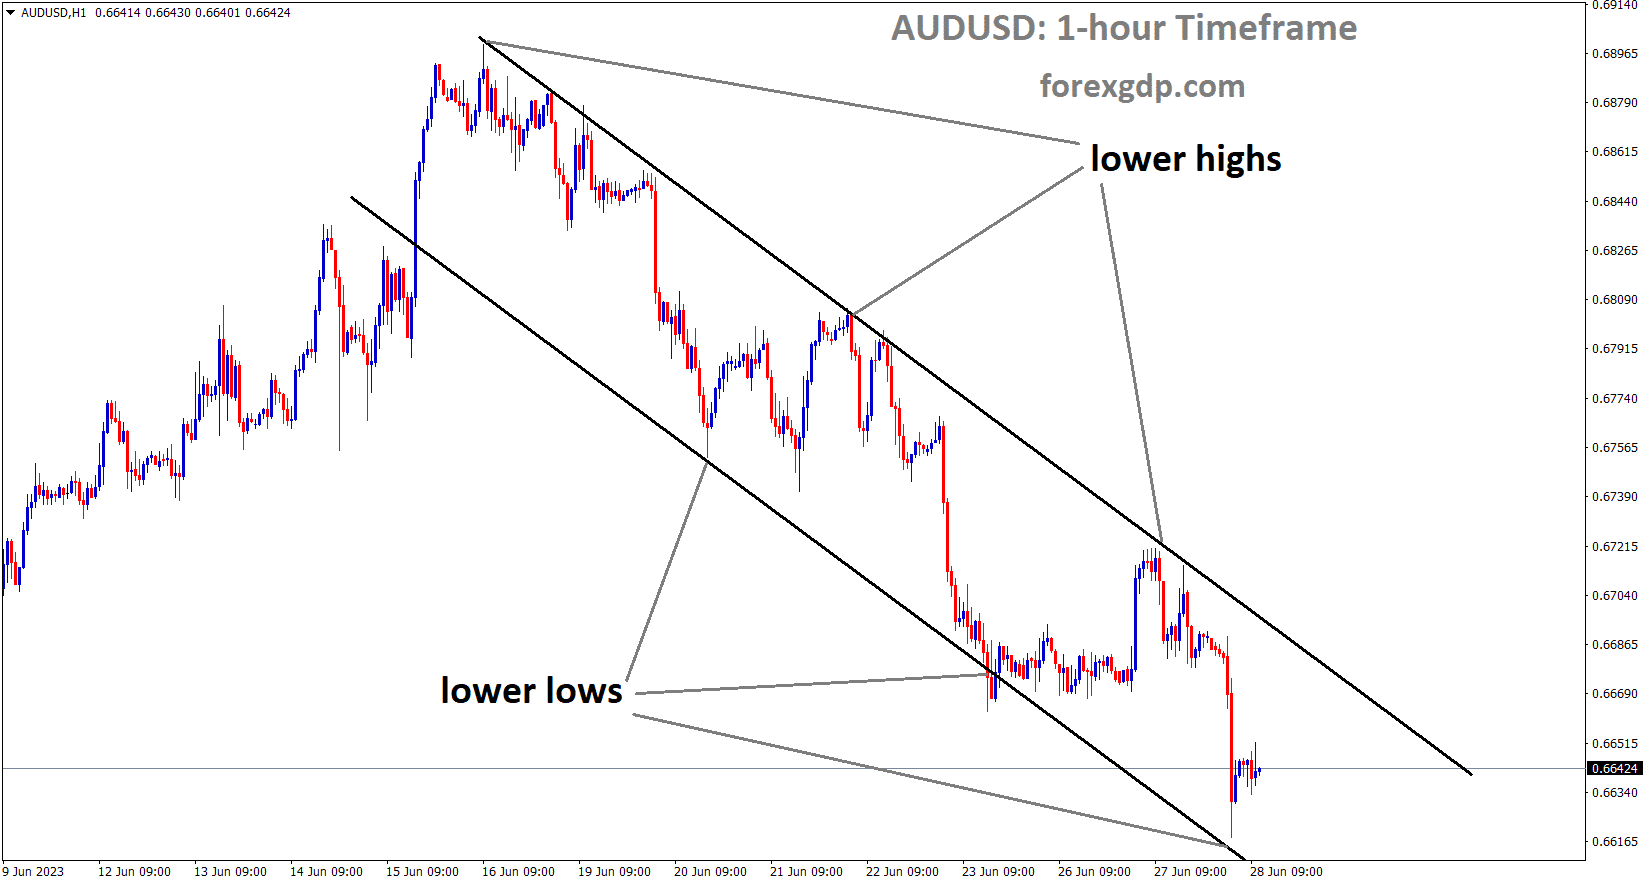 AUDUSD is moving in the Descending Channel and the market has rebounded from the lower low area of the channel